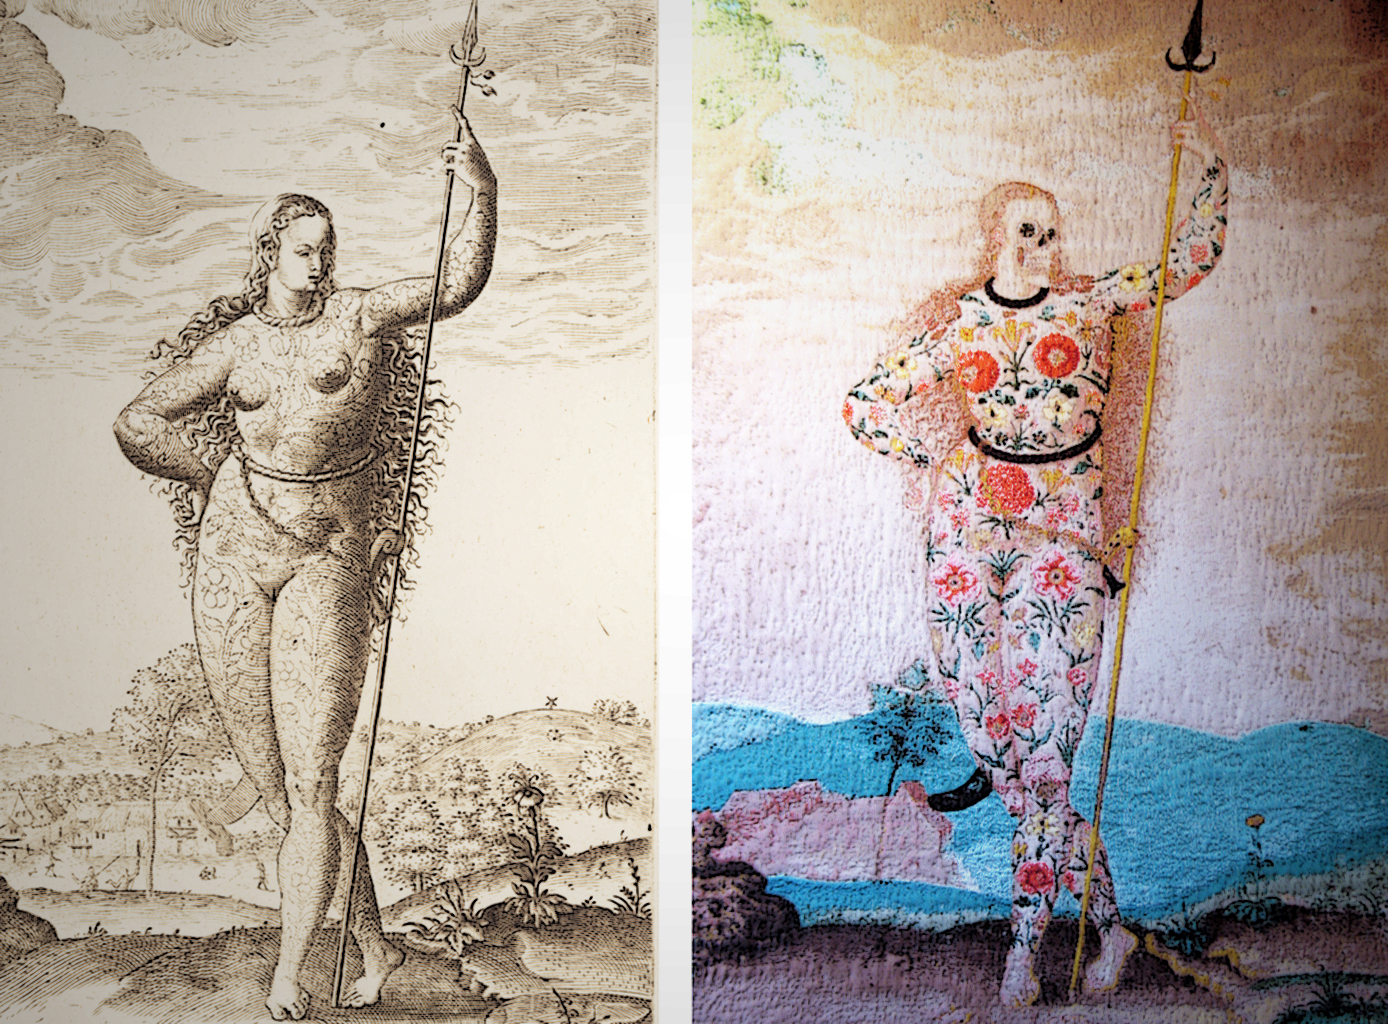 Two interpretations of Le Moyne's A Young Daughter of the Picts: de Bry's 16th century engraving (left) and Taylor's 21st century digital tapestry.